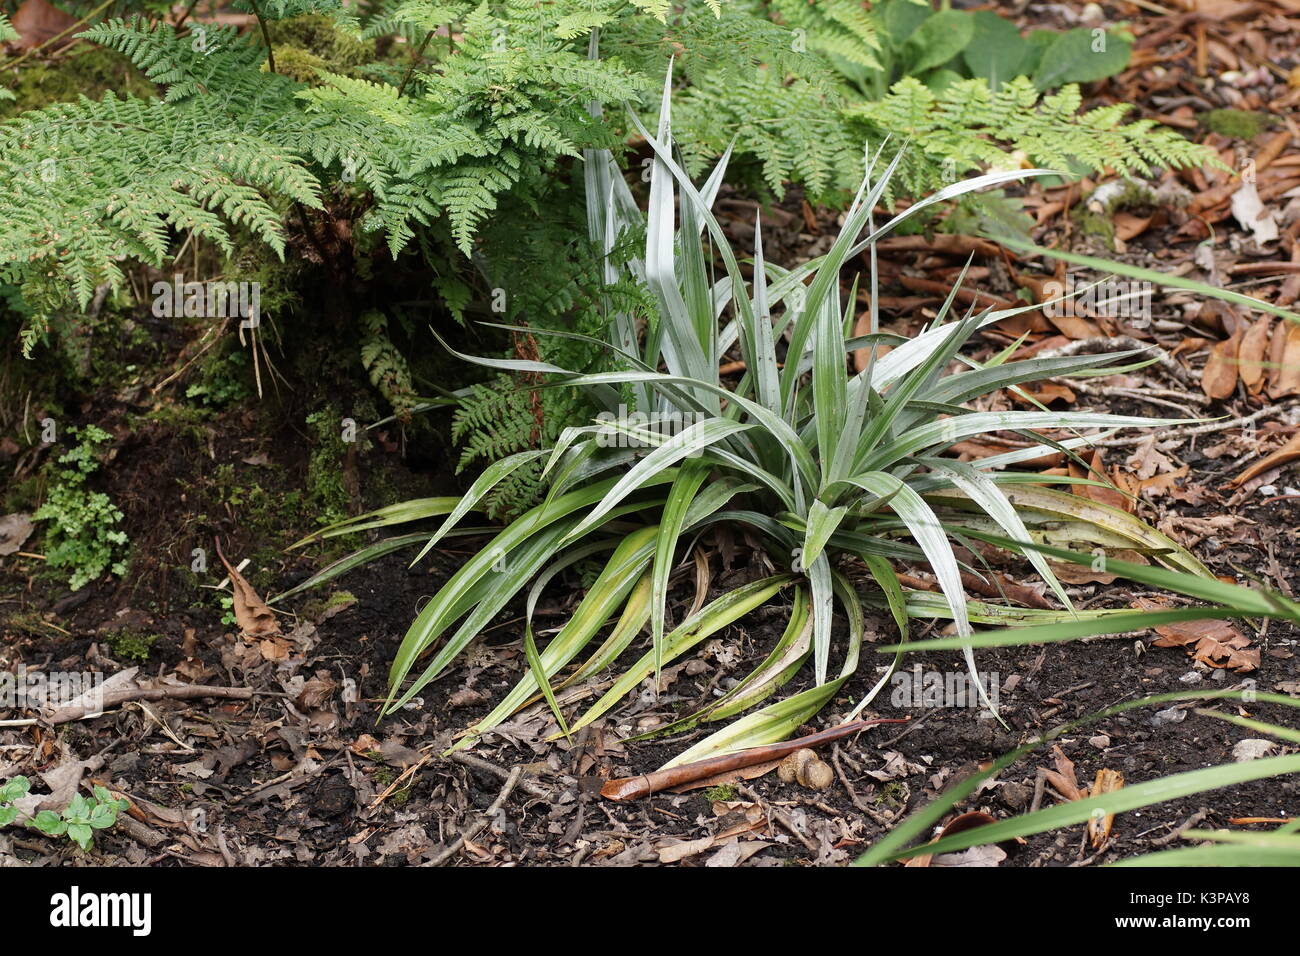 Astelia chatamica 'Silver Spear' at Clyne gardens, Swansea, Wales, UK. Stock Photo